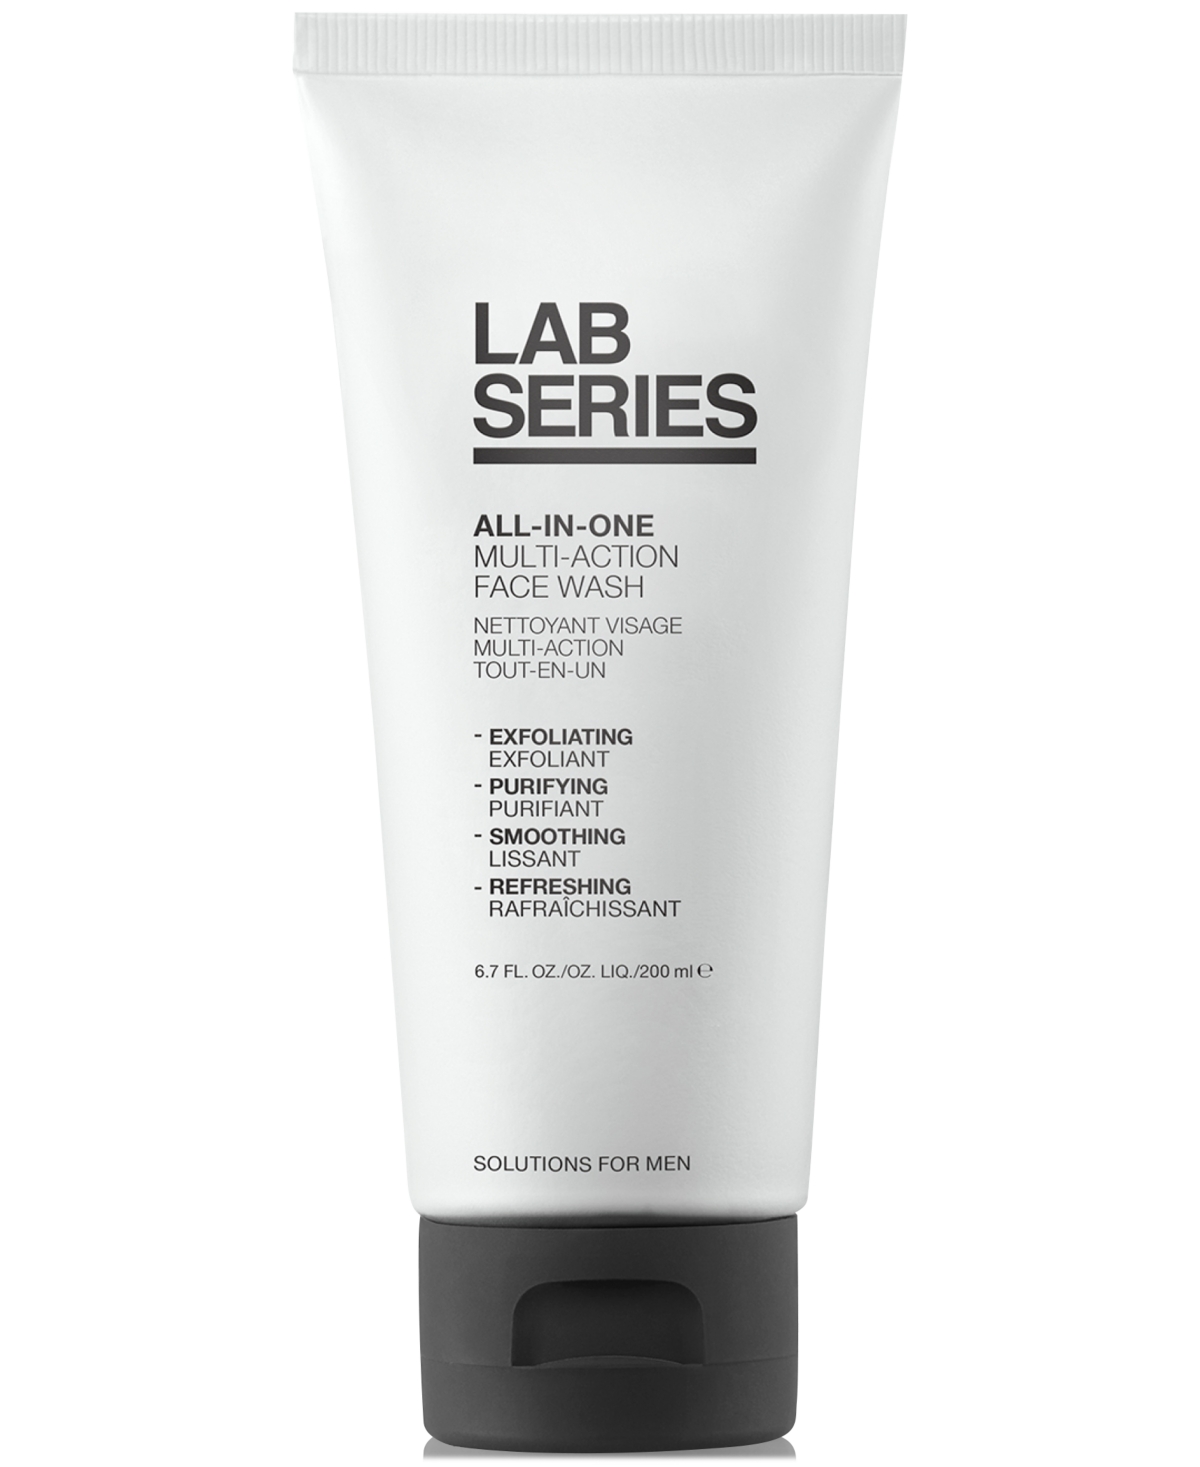 Skincare For Men All-In-One Multi-Action Face Wash, 6.7 oz.